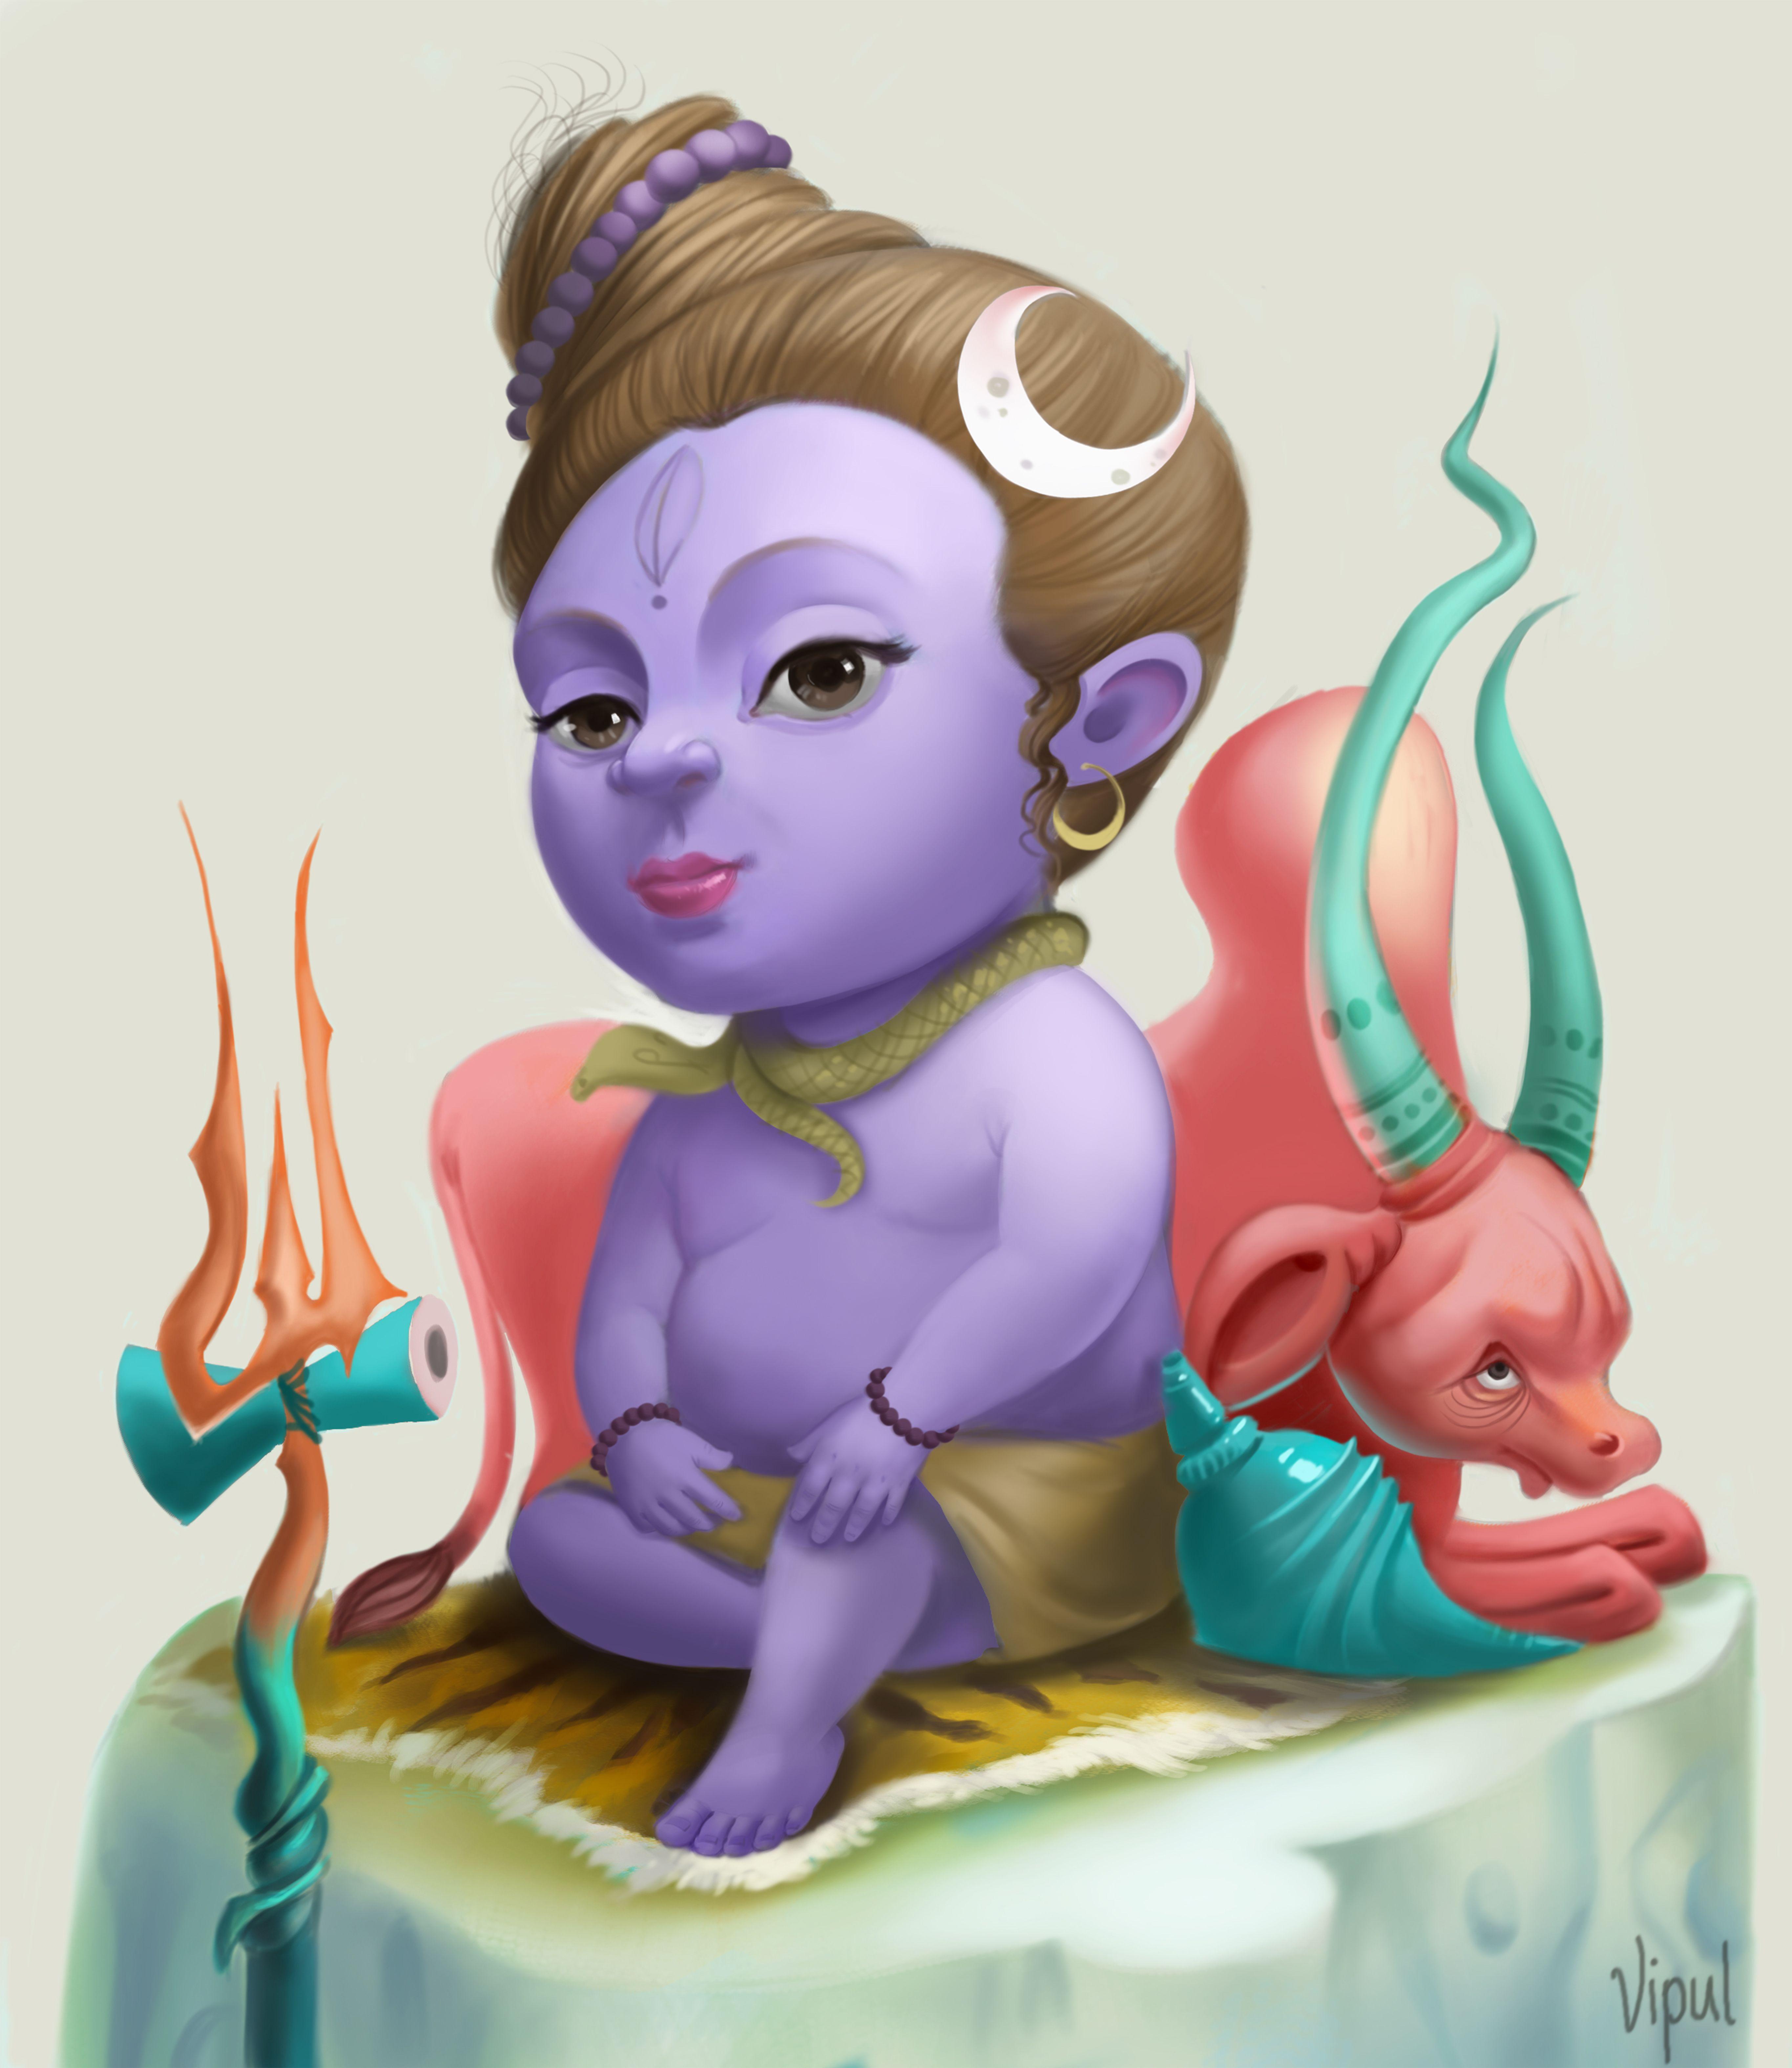 Bal Shiva art.This is a child form avatar of lord shiva .i made it because whenever i see for lord shiva references on pintere. Shiva art, Lord shiva, Shiva